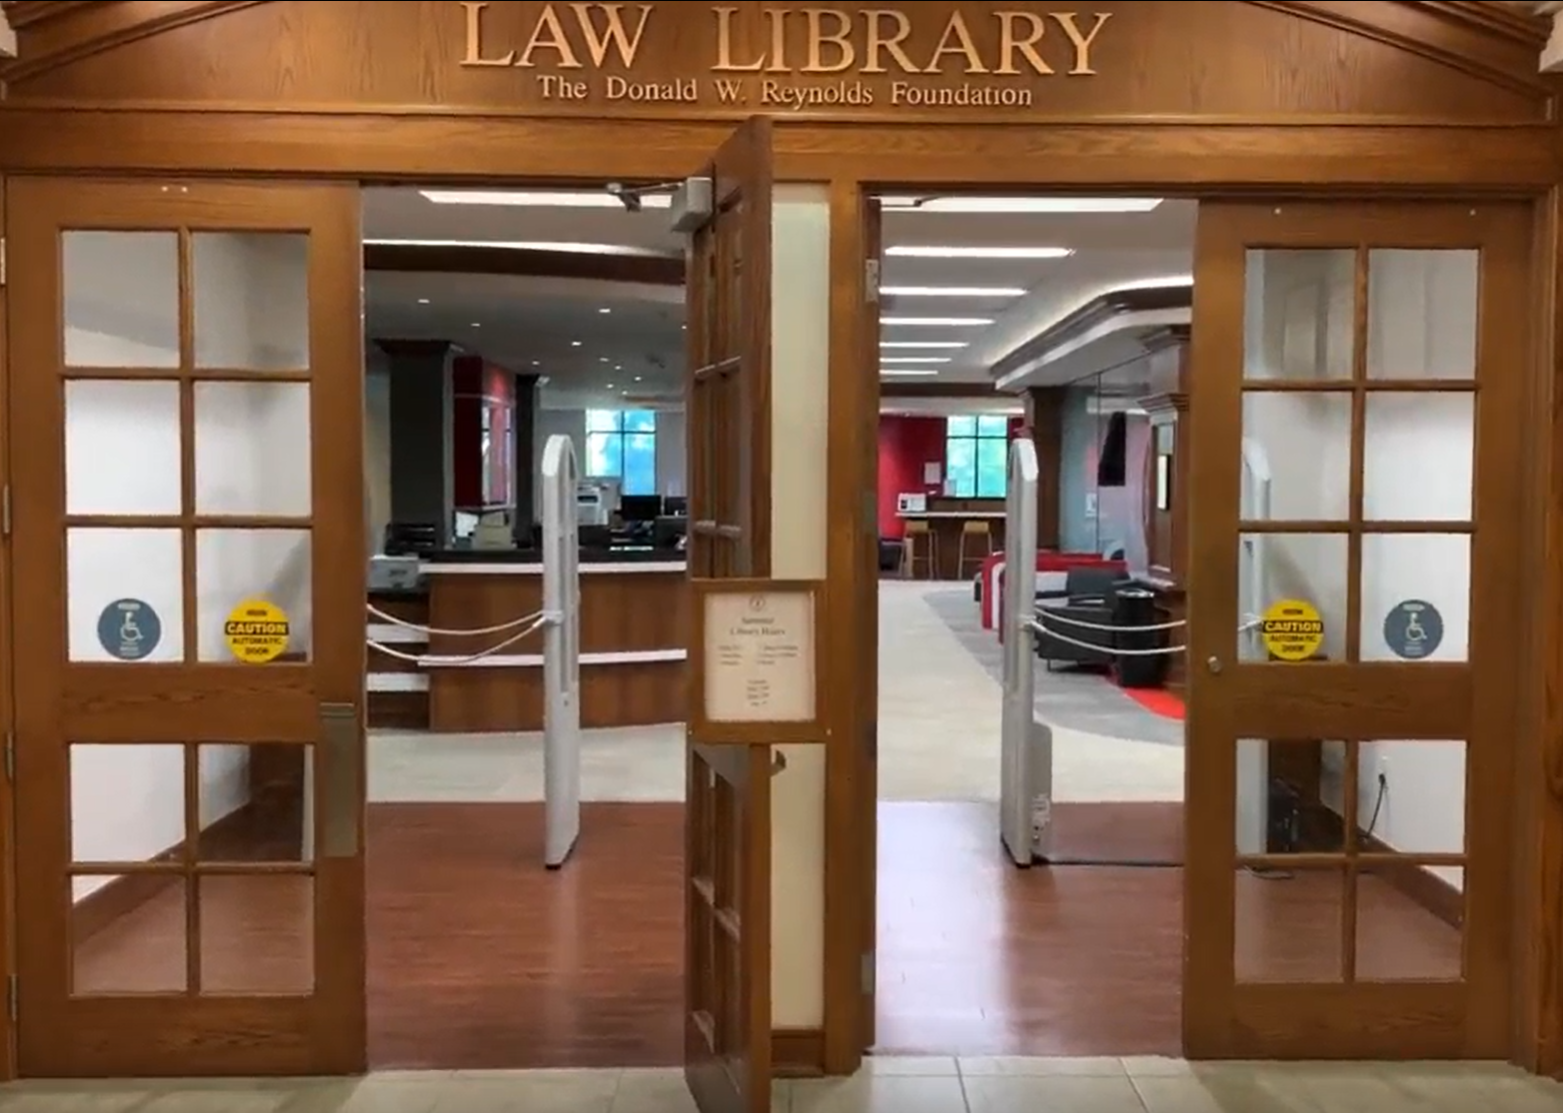 Law Library Entrance